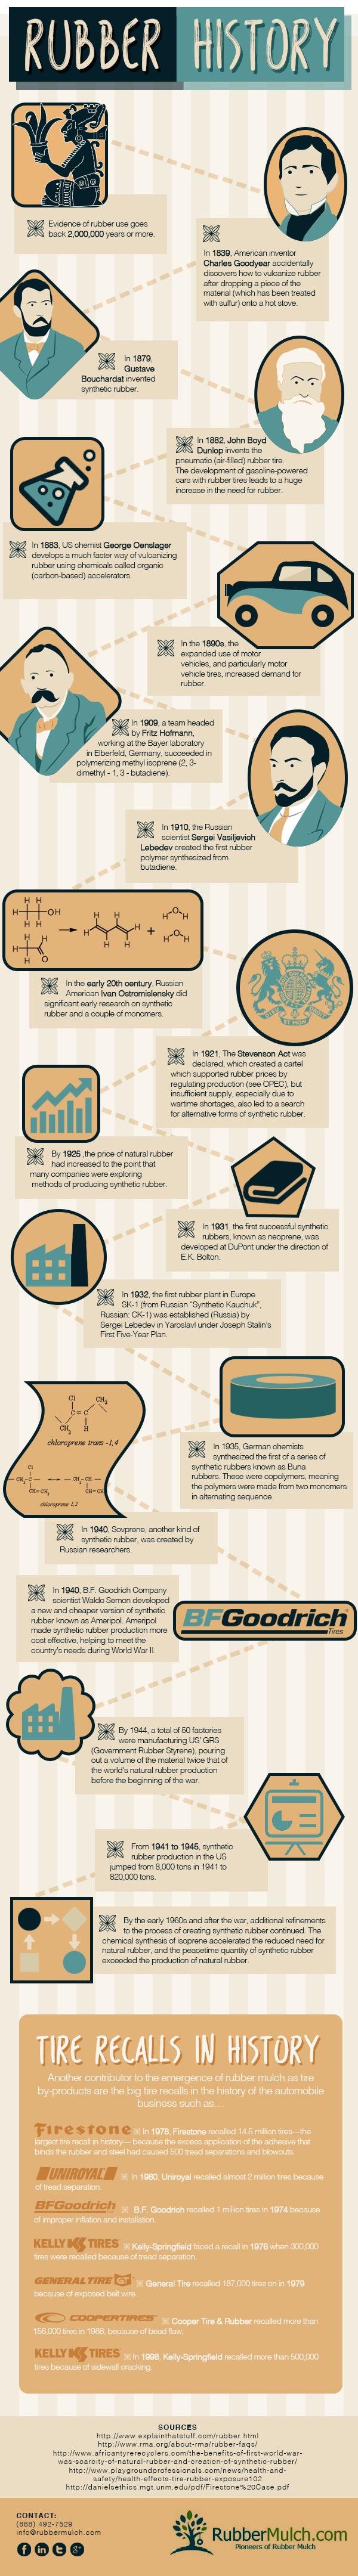 history of rubber infographic